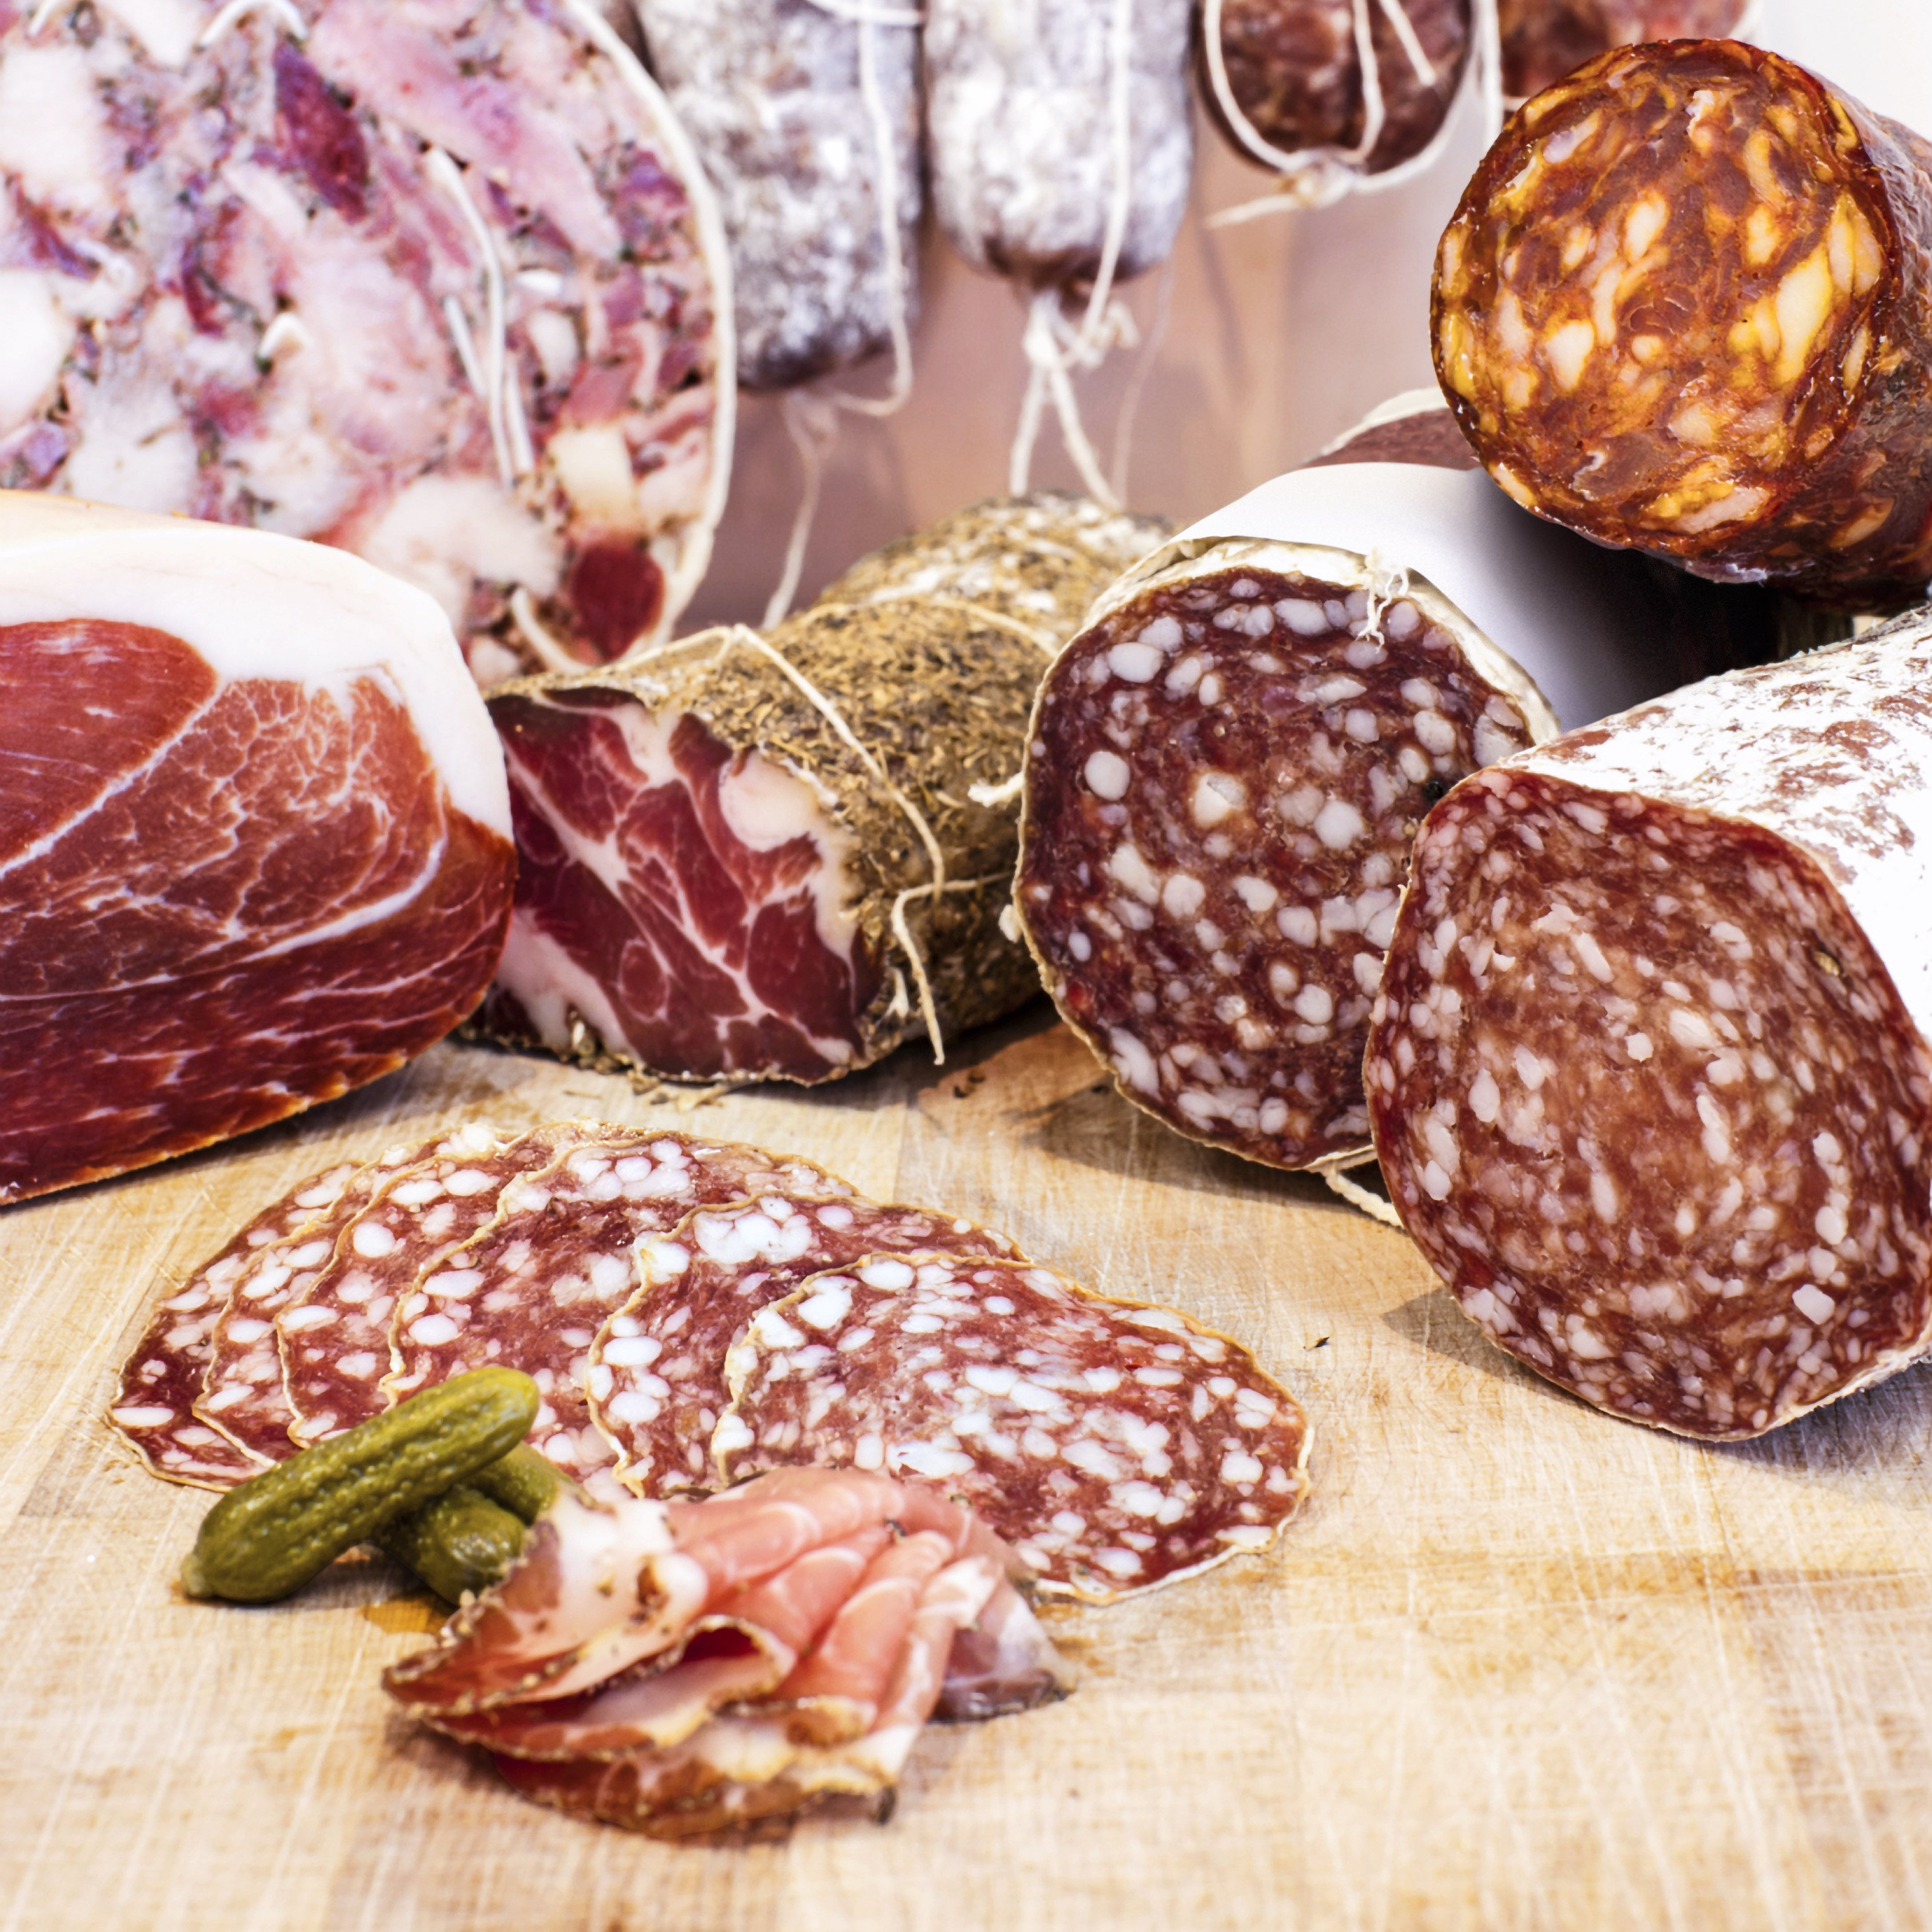 How To Get Started in Curing Meat